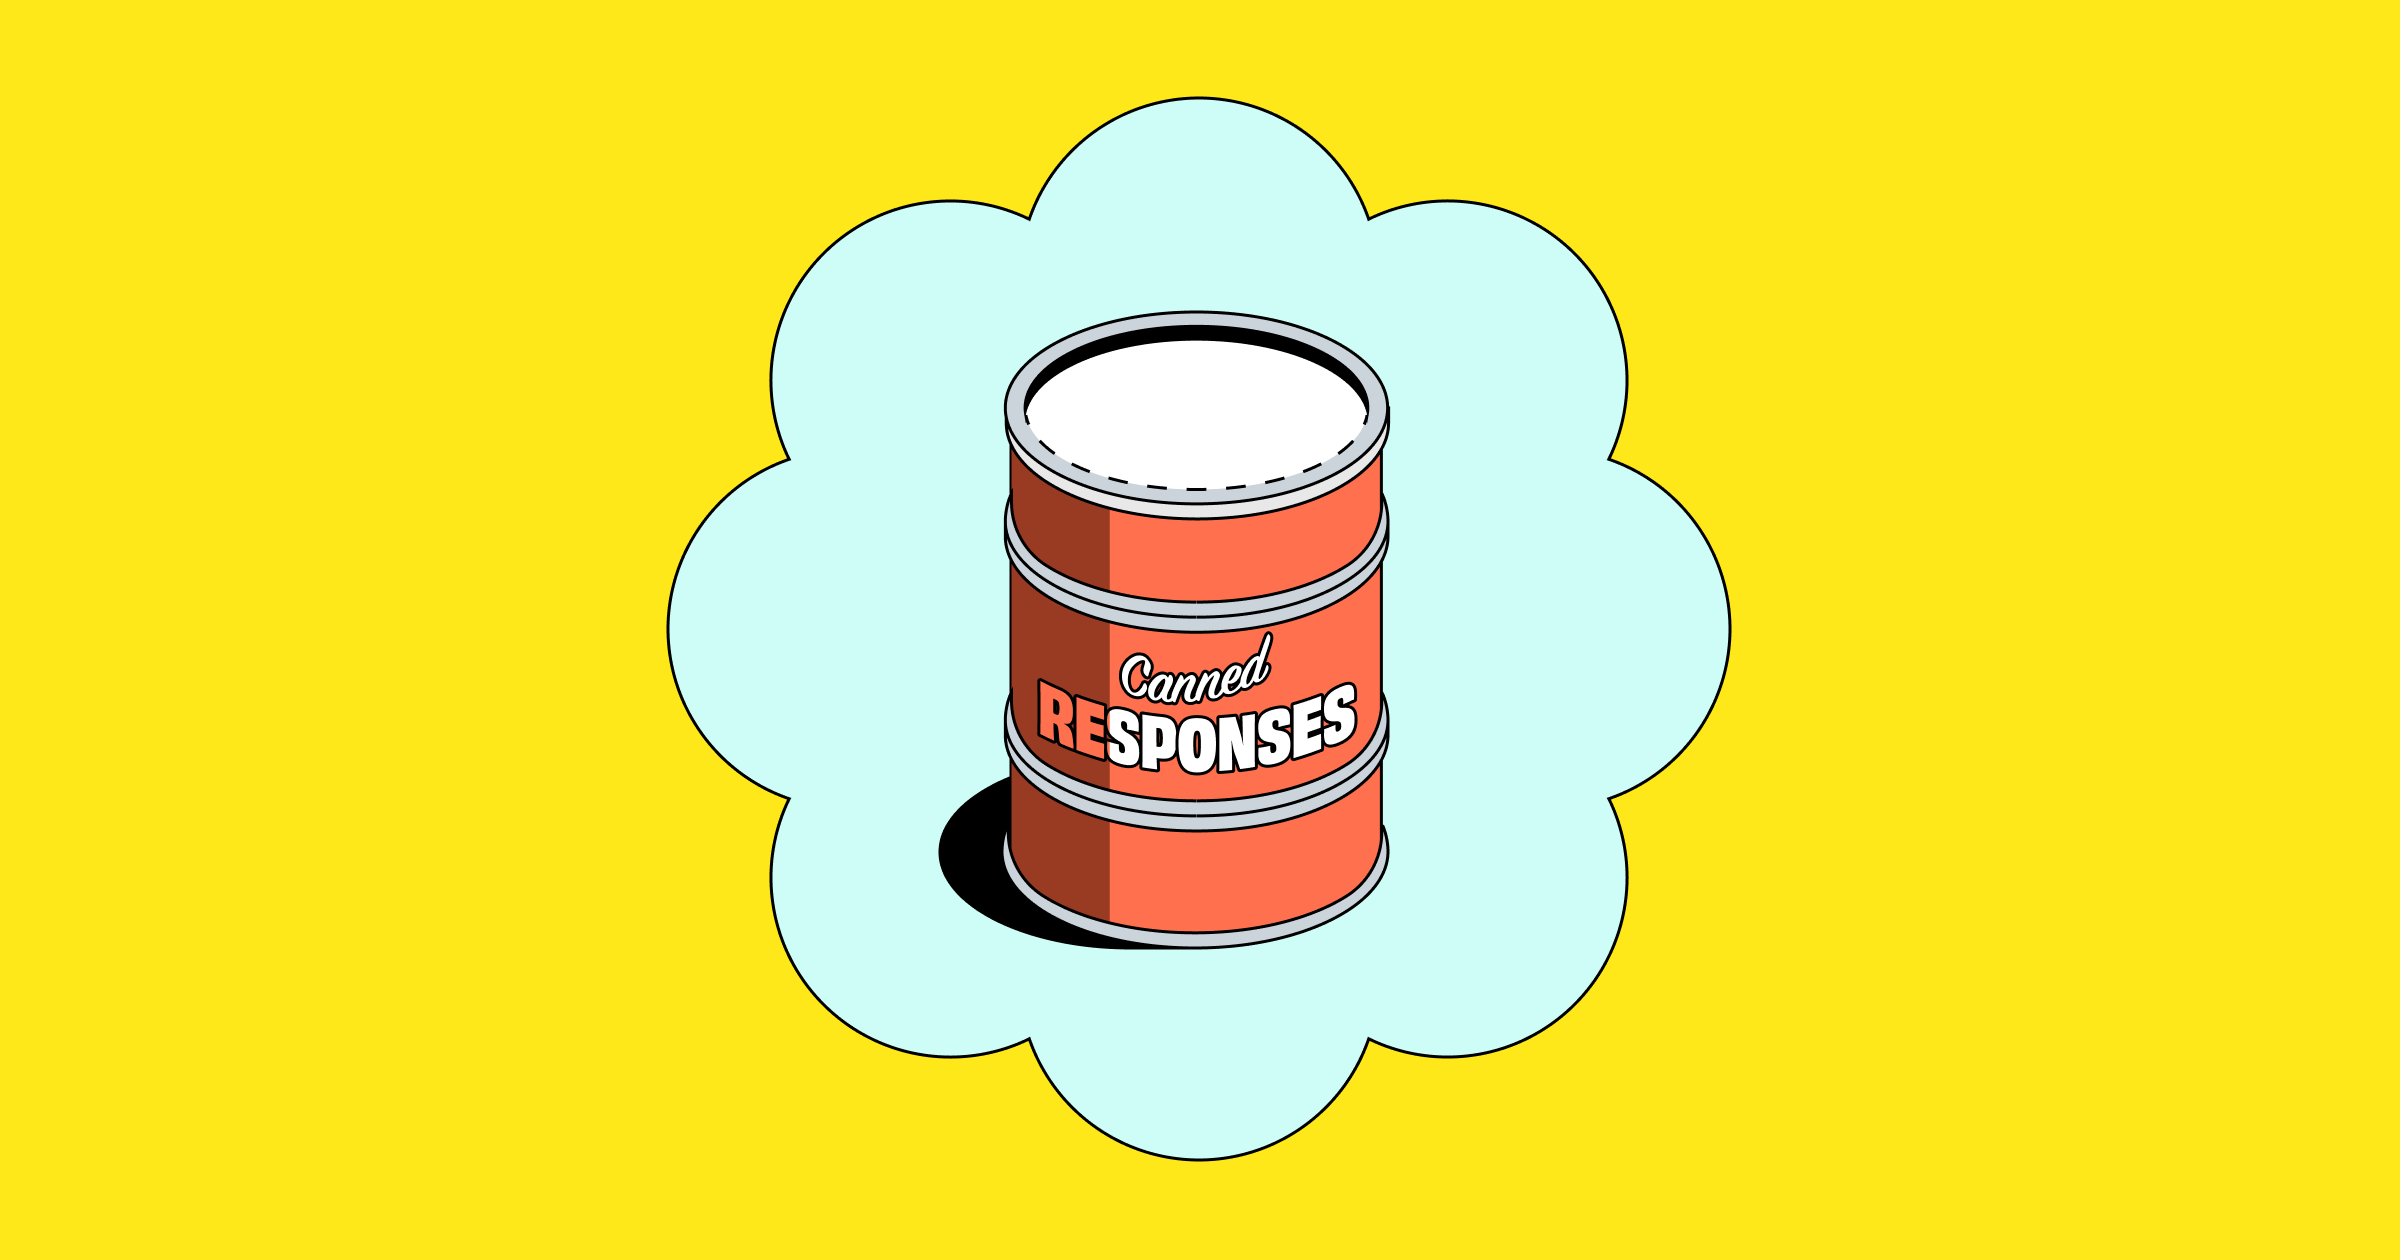 Canned responses